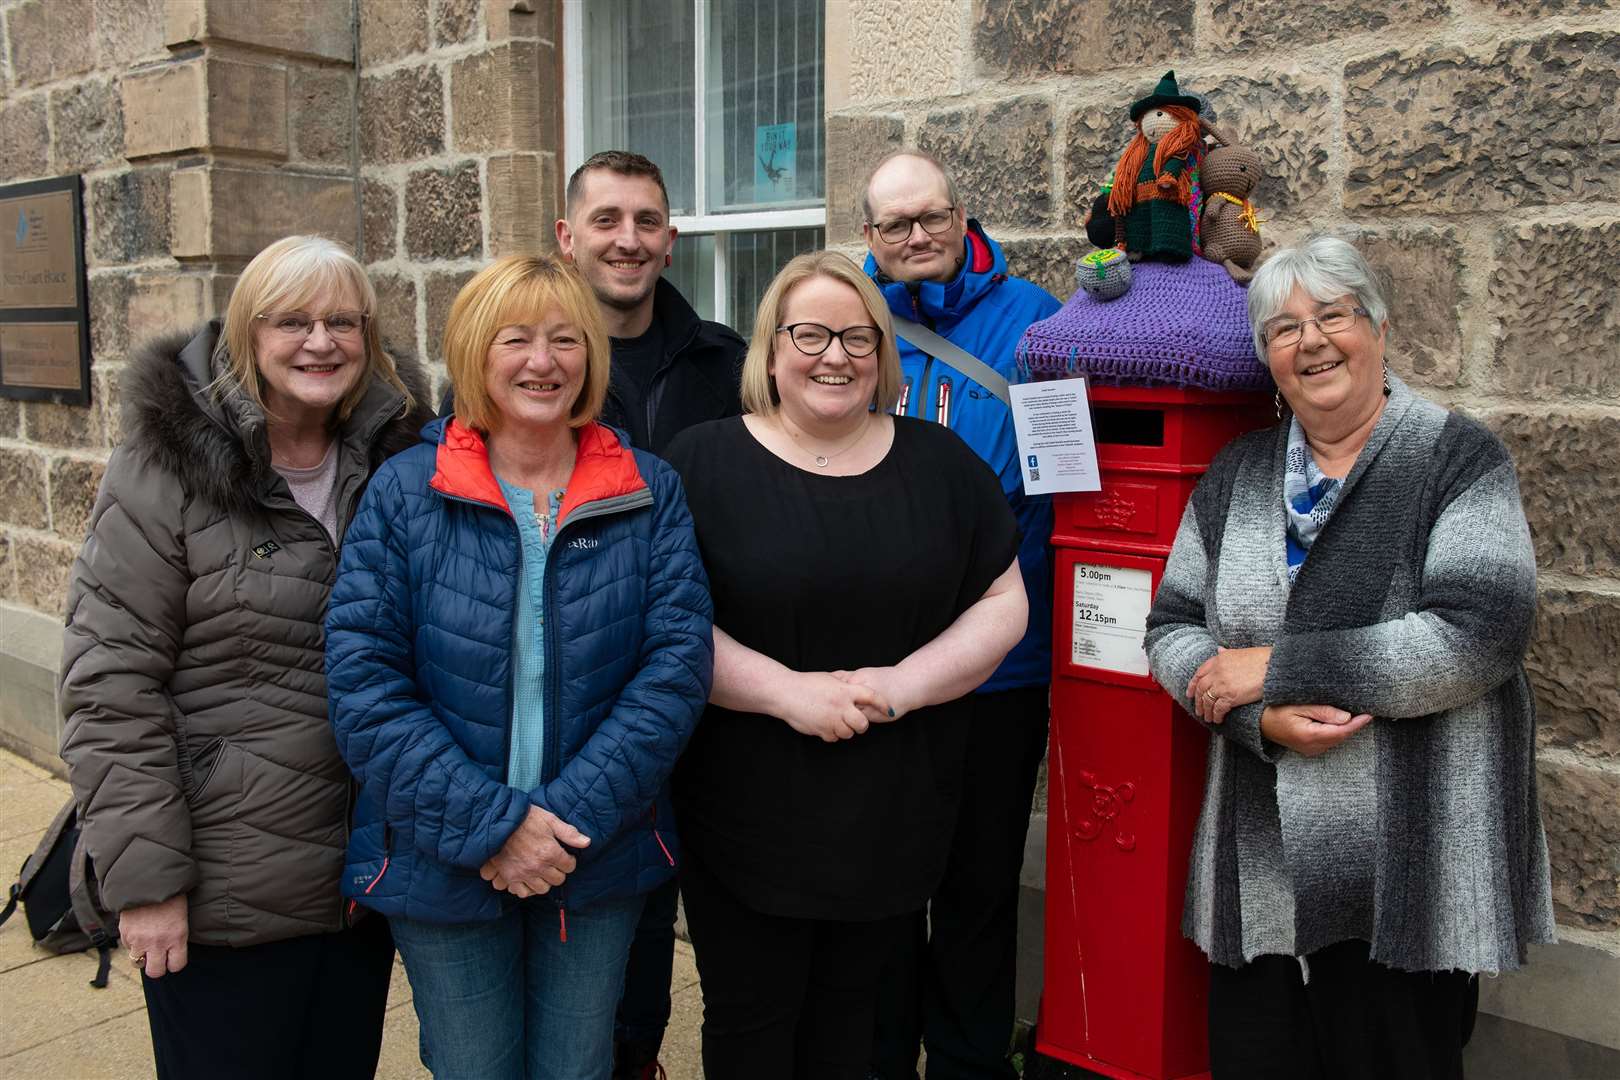 The Nairn Yarnbombers L/r Liz Le Brocq, Ann Forsyth, Adam Thompson, Kirsty Brown, Andrew Innes, Caroline Mackay, missing is member Morag Anderson,outside The Townhouse at The Isobel Gowdie display..